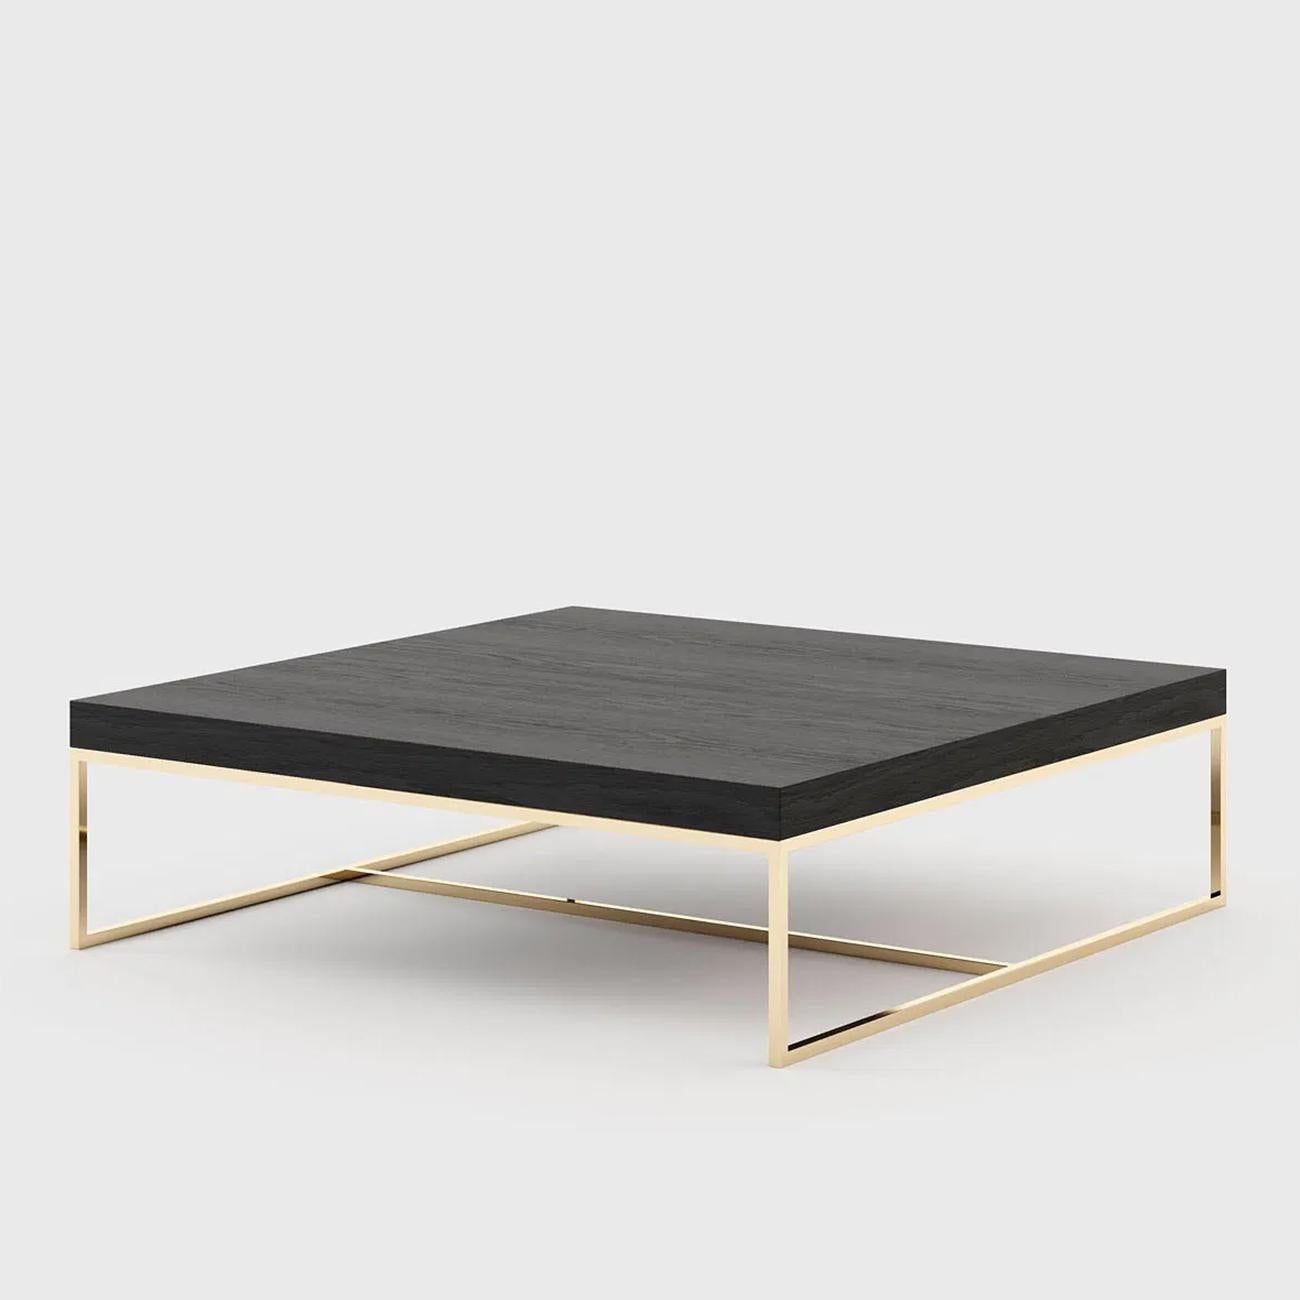 Coffee table Portland with eucalyptus wood top in smocked
matte finish. With base in polish stainless steel in gold finish. 
Also available with other wood finishes and other steel finishes on request.